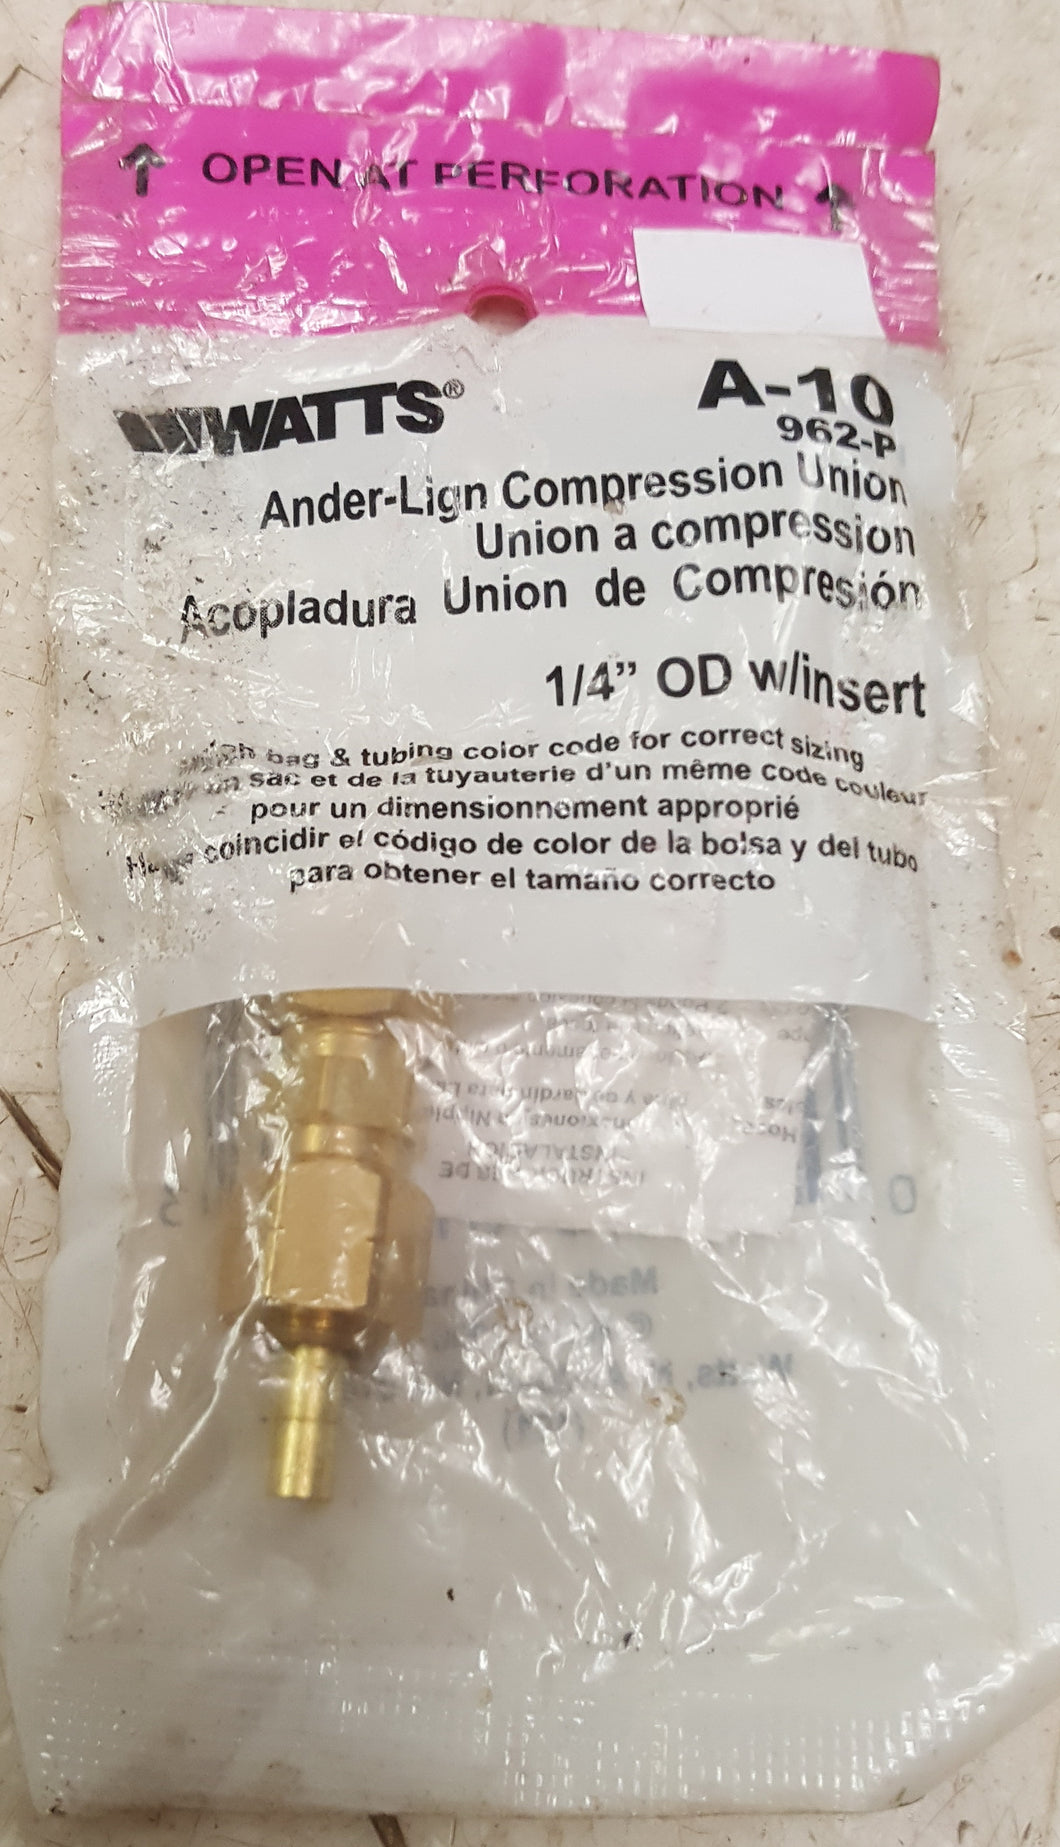 Watts A-10 962-P Ander-Lign Compression Union 1/4